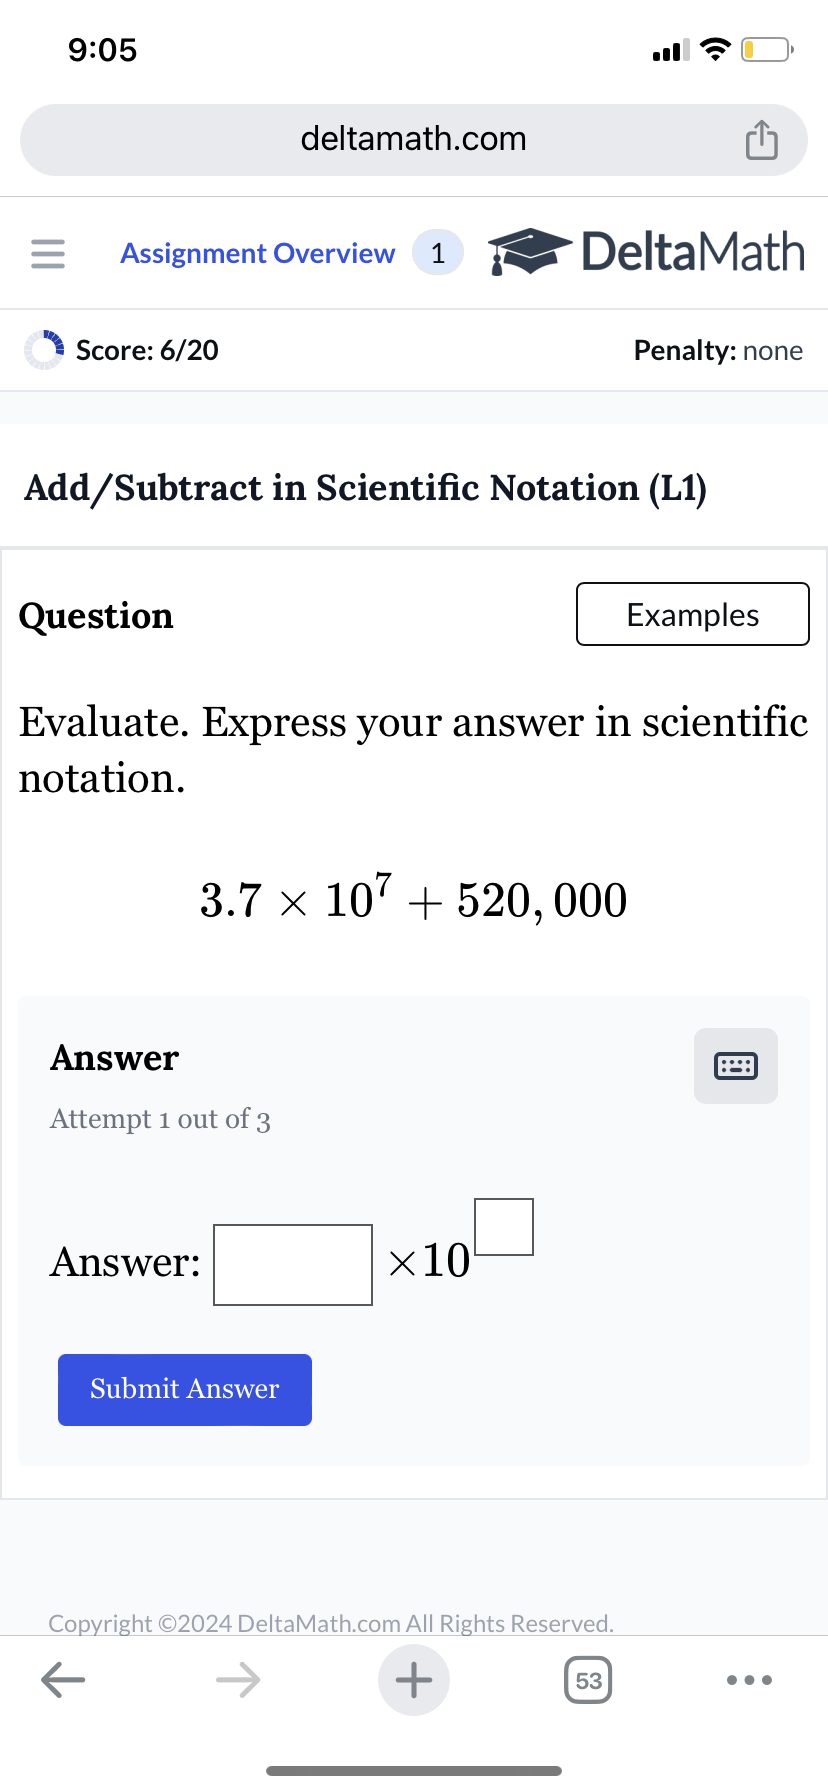 9:05
deltamath.com
= Assignment Overview 1
DeltaMath
Score: 6/20
Penalty: none
Add/Subtract in Scientific Notation (L1)
Question
Examples
Evaluate. Express your answer in scientific
notation.
3.7 x 107520,000
Answer
Attempt 1 out of 3
Answer:
Submit Answer
×10
Copyright ©2024 DeltaMath.com All Rights Reserved.
←
+
53